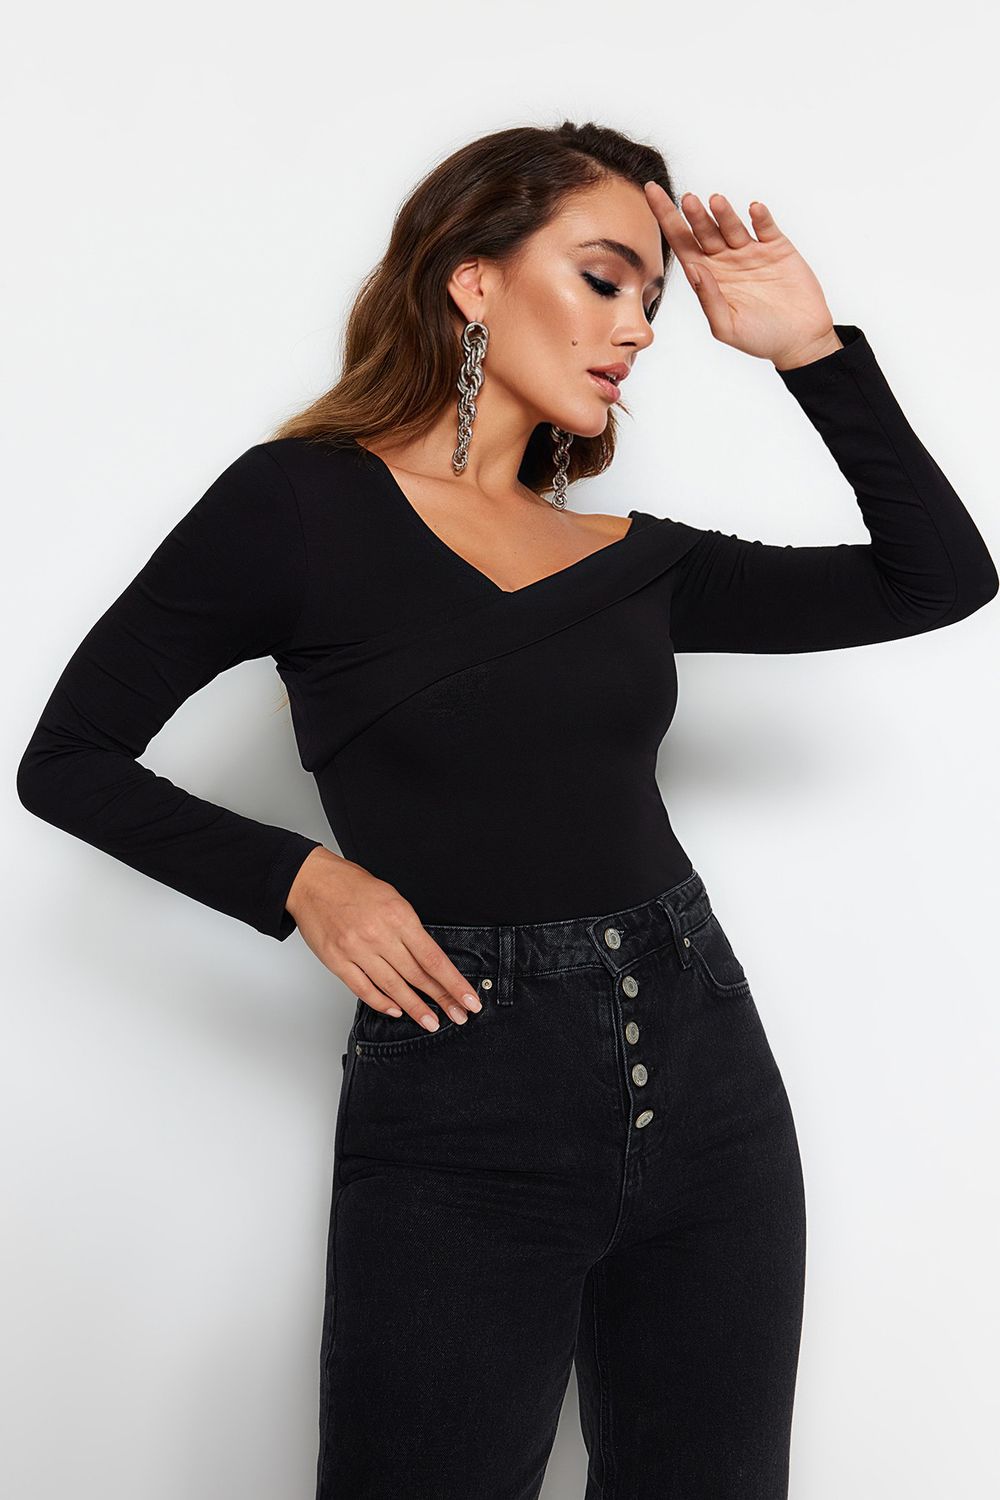 Flounce Tall narrow ribbed leggings with side slit in black